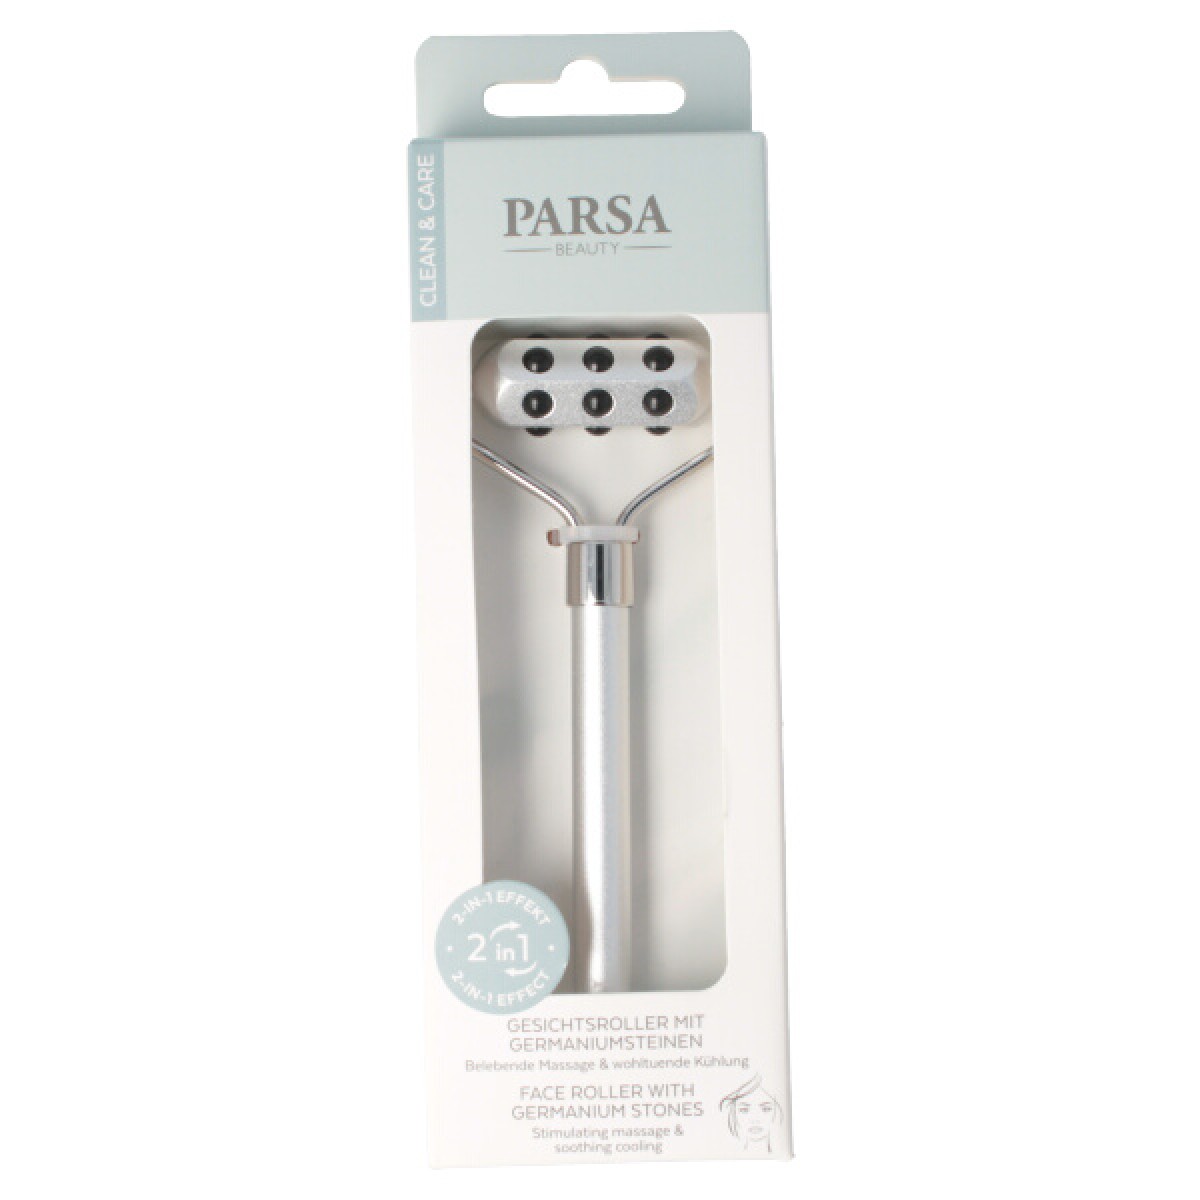 PARSA FACE ROLLER WITH GERMANIUM STONE